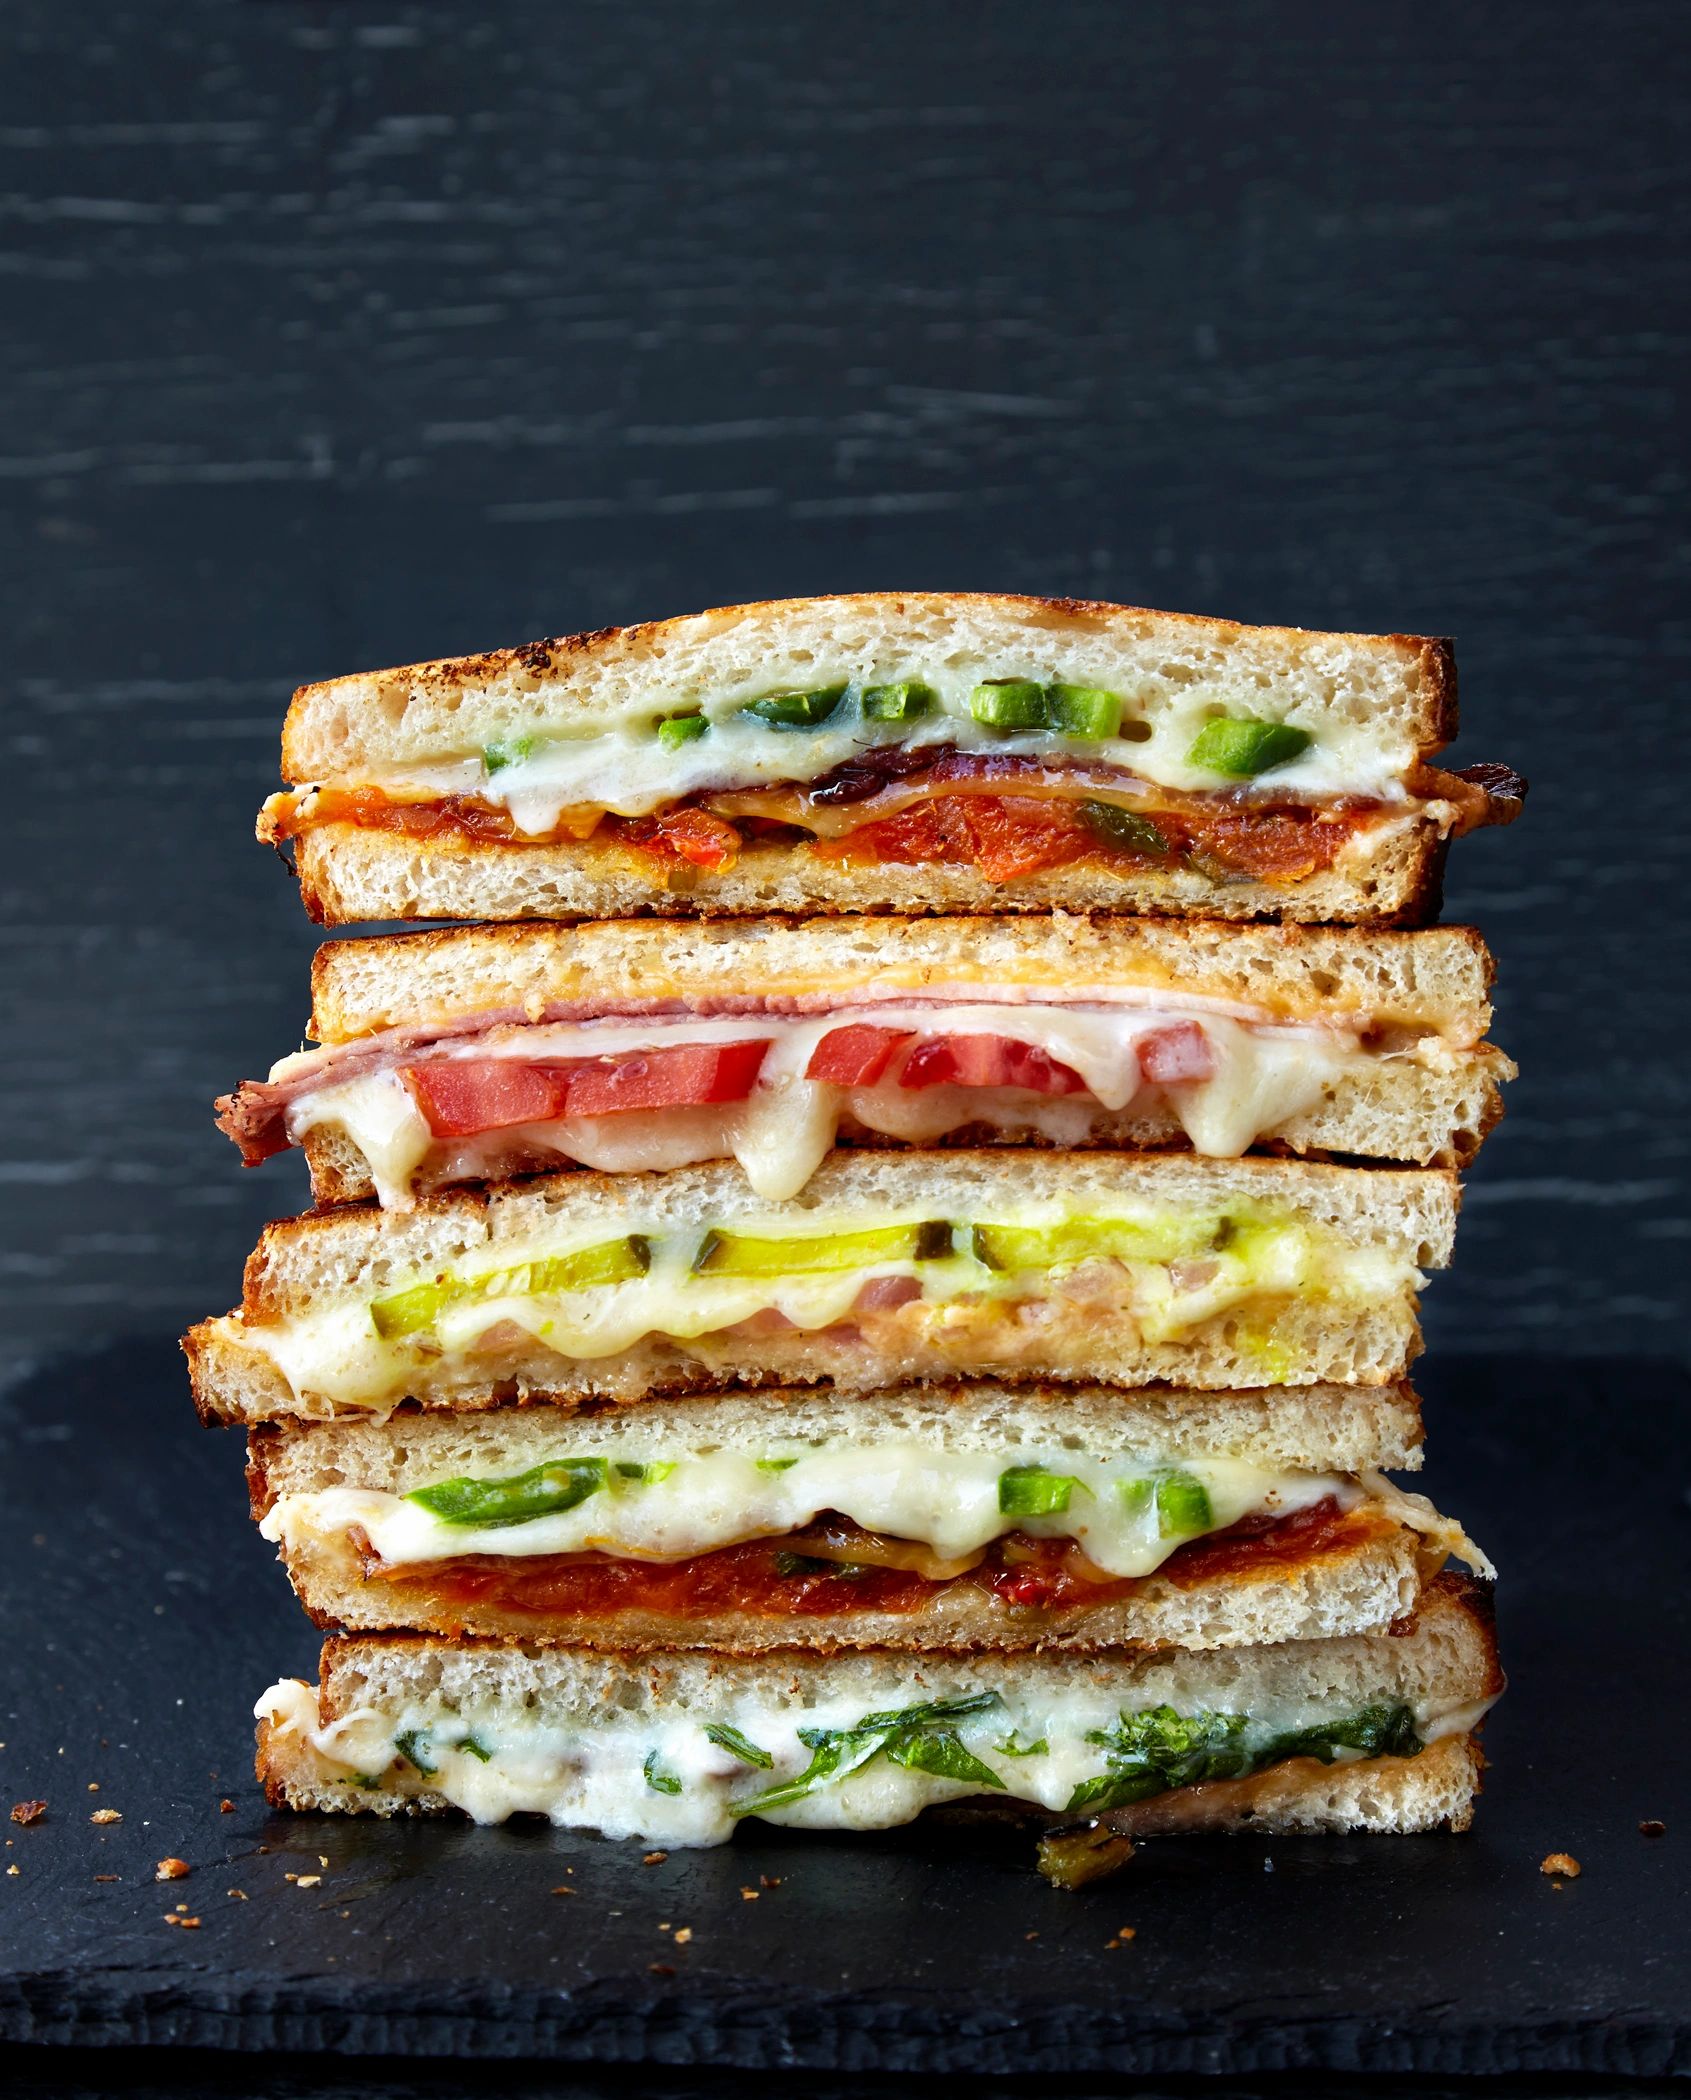 The American Grilled Cheese Kitchen - Sandwich Shop, Catering, Salad